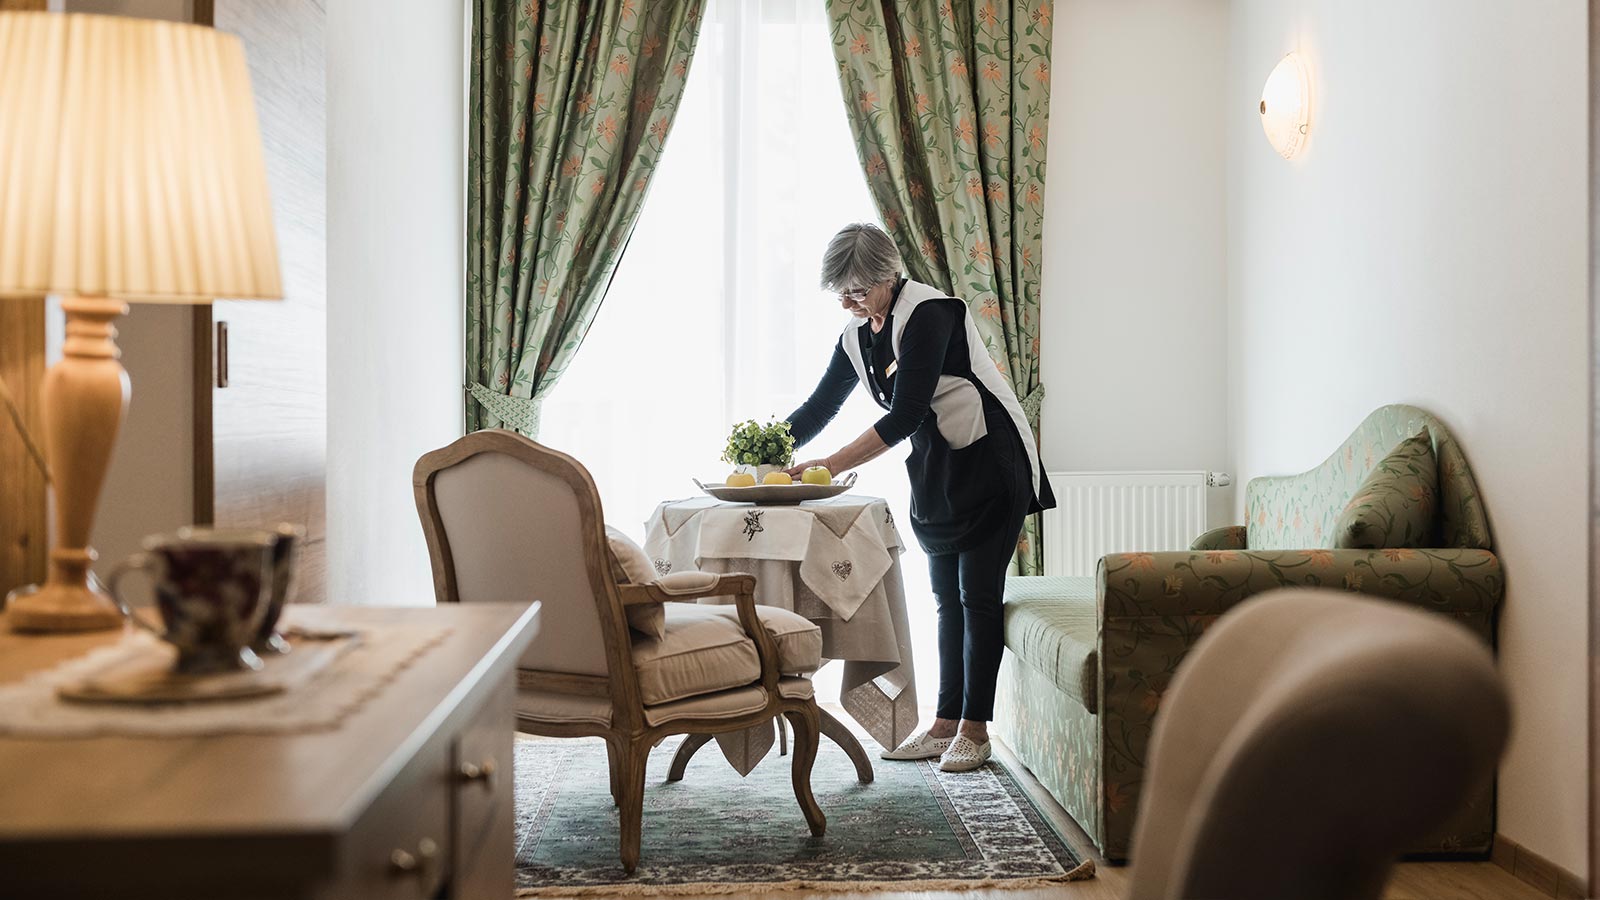 A waitress arranges a plant in one of the rooms of the Hotel Laguscei